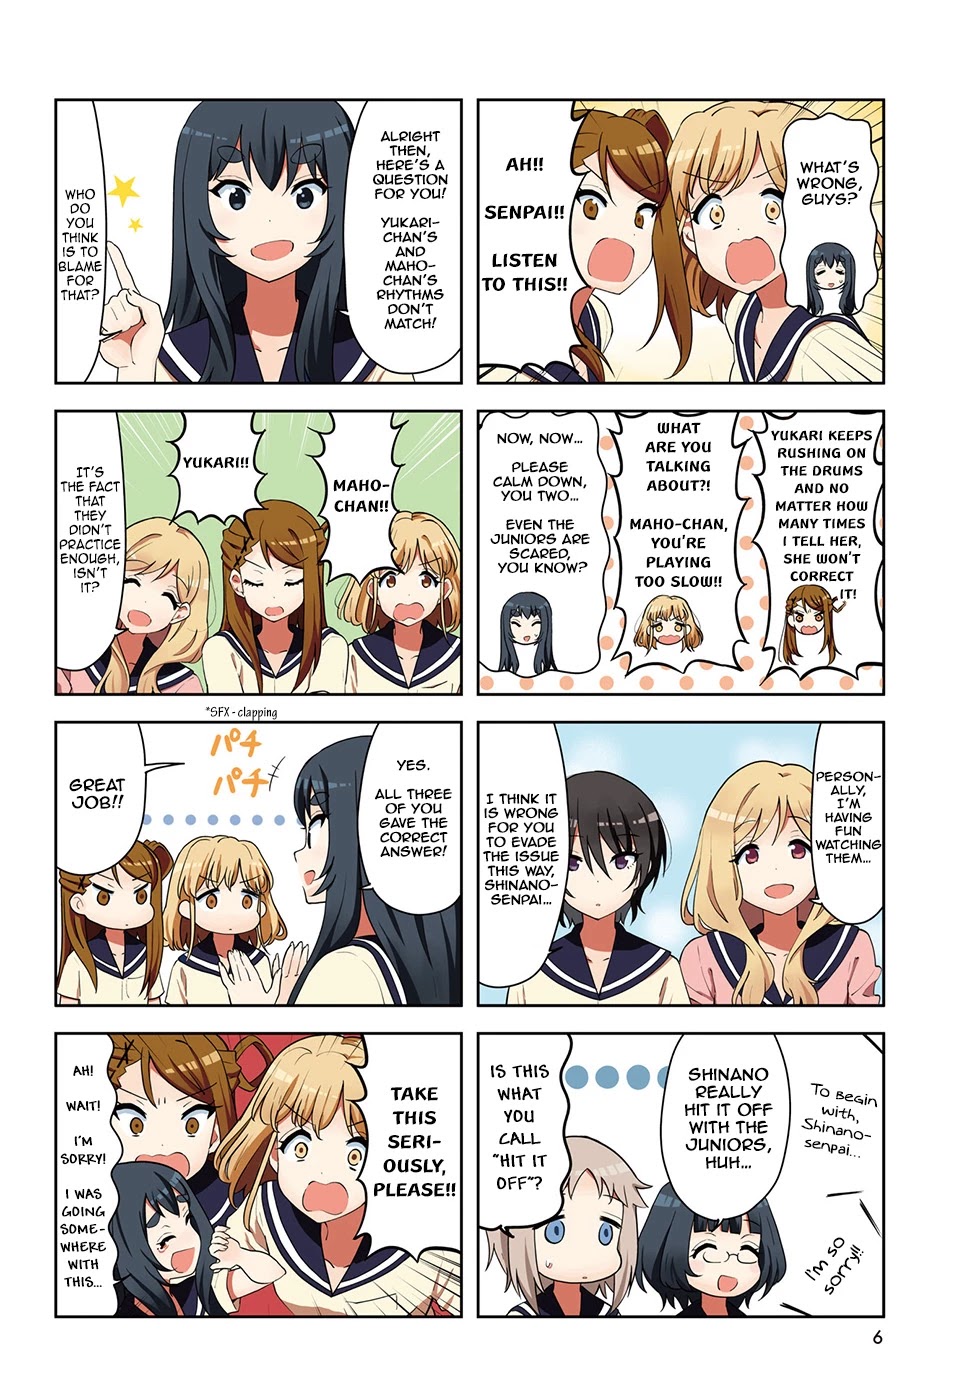 K-On! Shuffle - Page 2